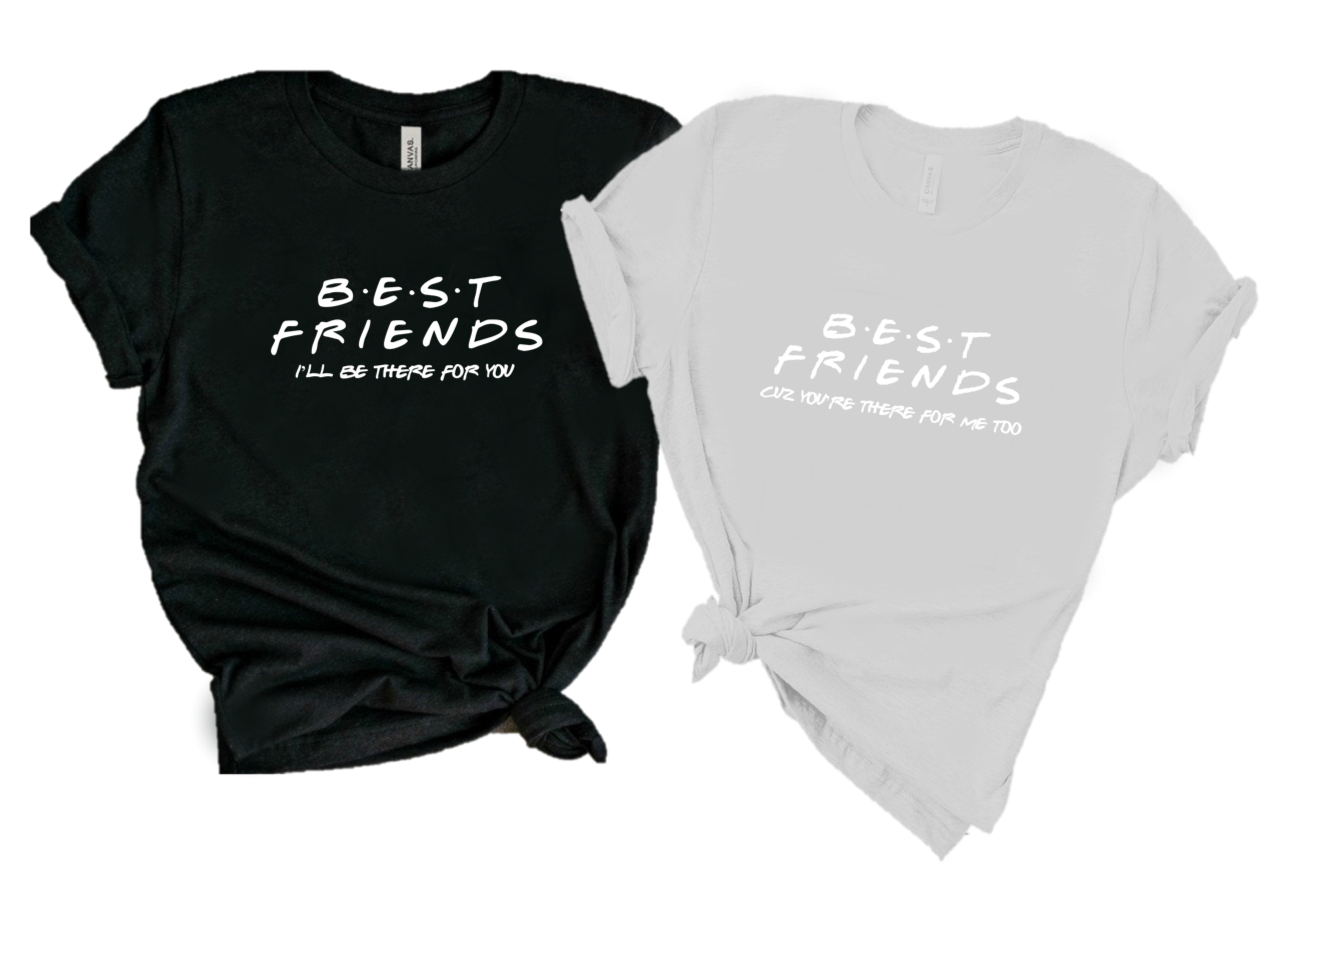 BEST FRIENDS (ILL BE THERE FOR YOU) ( CUZ YOU'RE THERE FOR ME TOO)